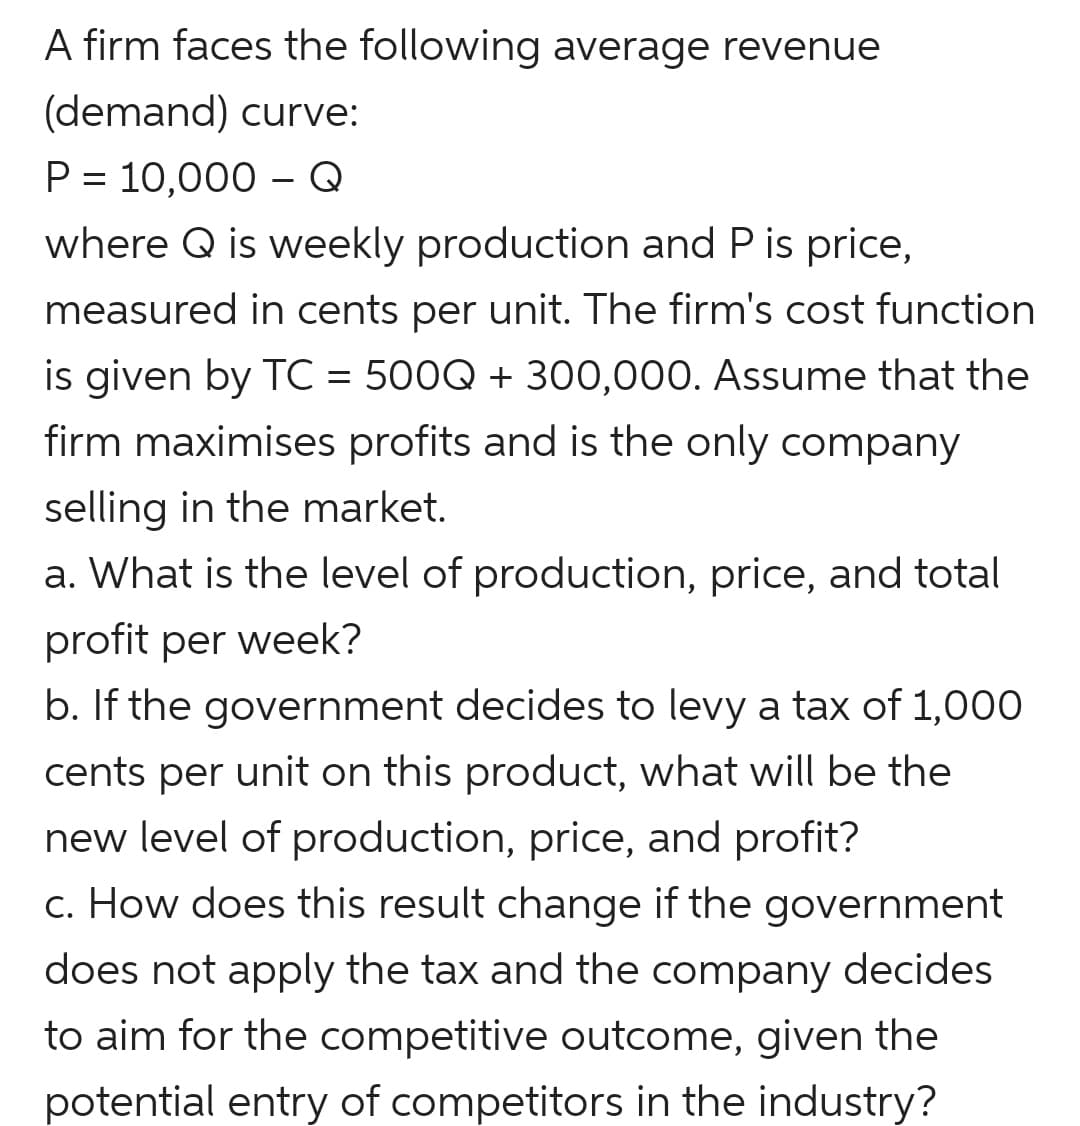 A firm faces the following average revenue
(demand) curve:
P = 10,000 – Q
where Q is weekly production and P is price,
measured in cents per unit. The firm's cost function
is given by TC = 500Q + 300,000. Assume that the
firm maximises profits and is the only company
selling in the market.
a. What is the level of production, price, and total
profit per week?
b. If the government decides to levy a tax of 1,000
cents per unit on this product, what will be the
new level of production, price, and profit?
c. How does this result change if the government
does not apply the tax and the company decides
to aim for the competitive outcome, given the
potential entry of competitors in the industry?
